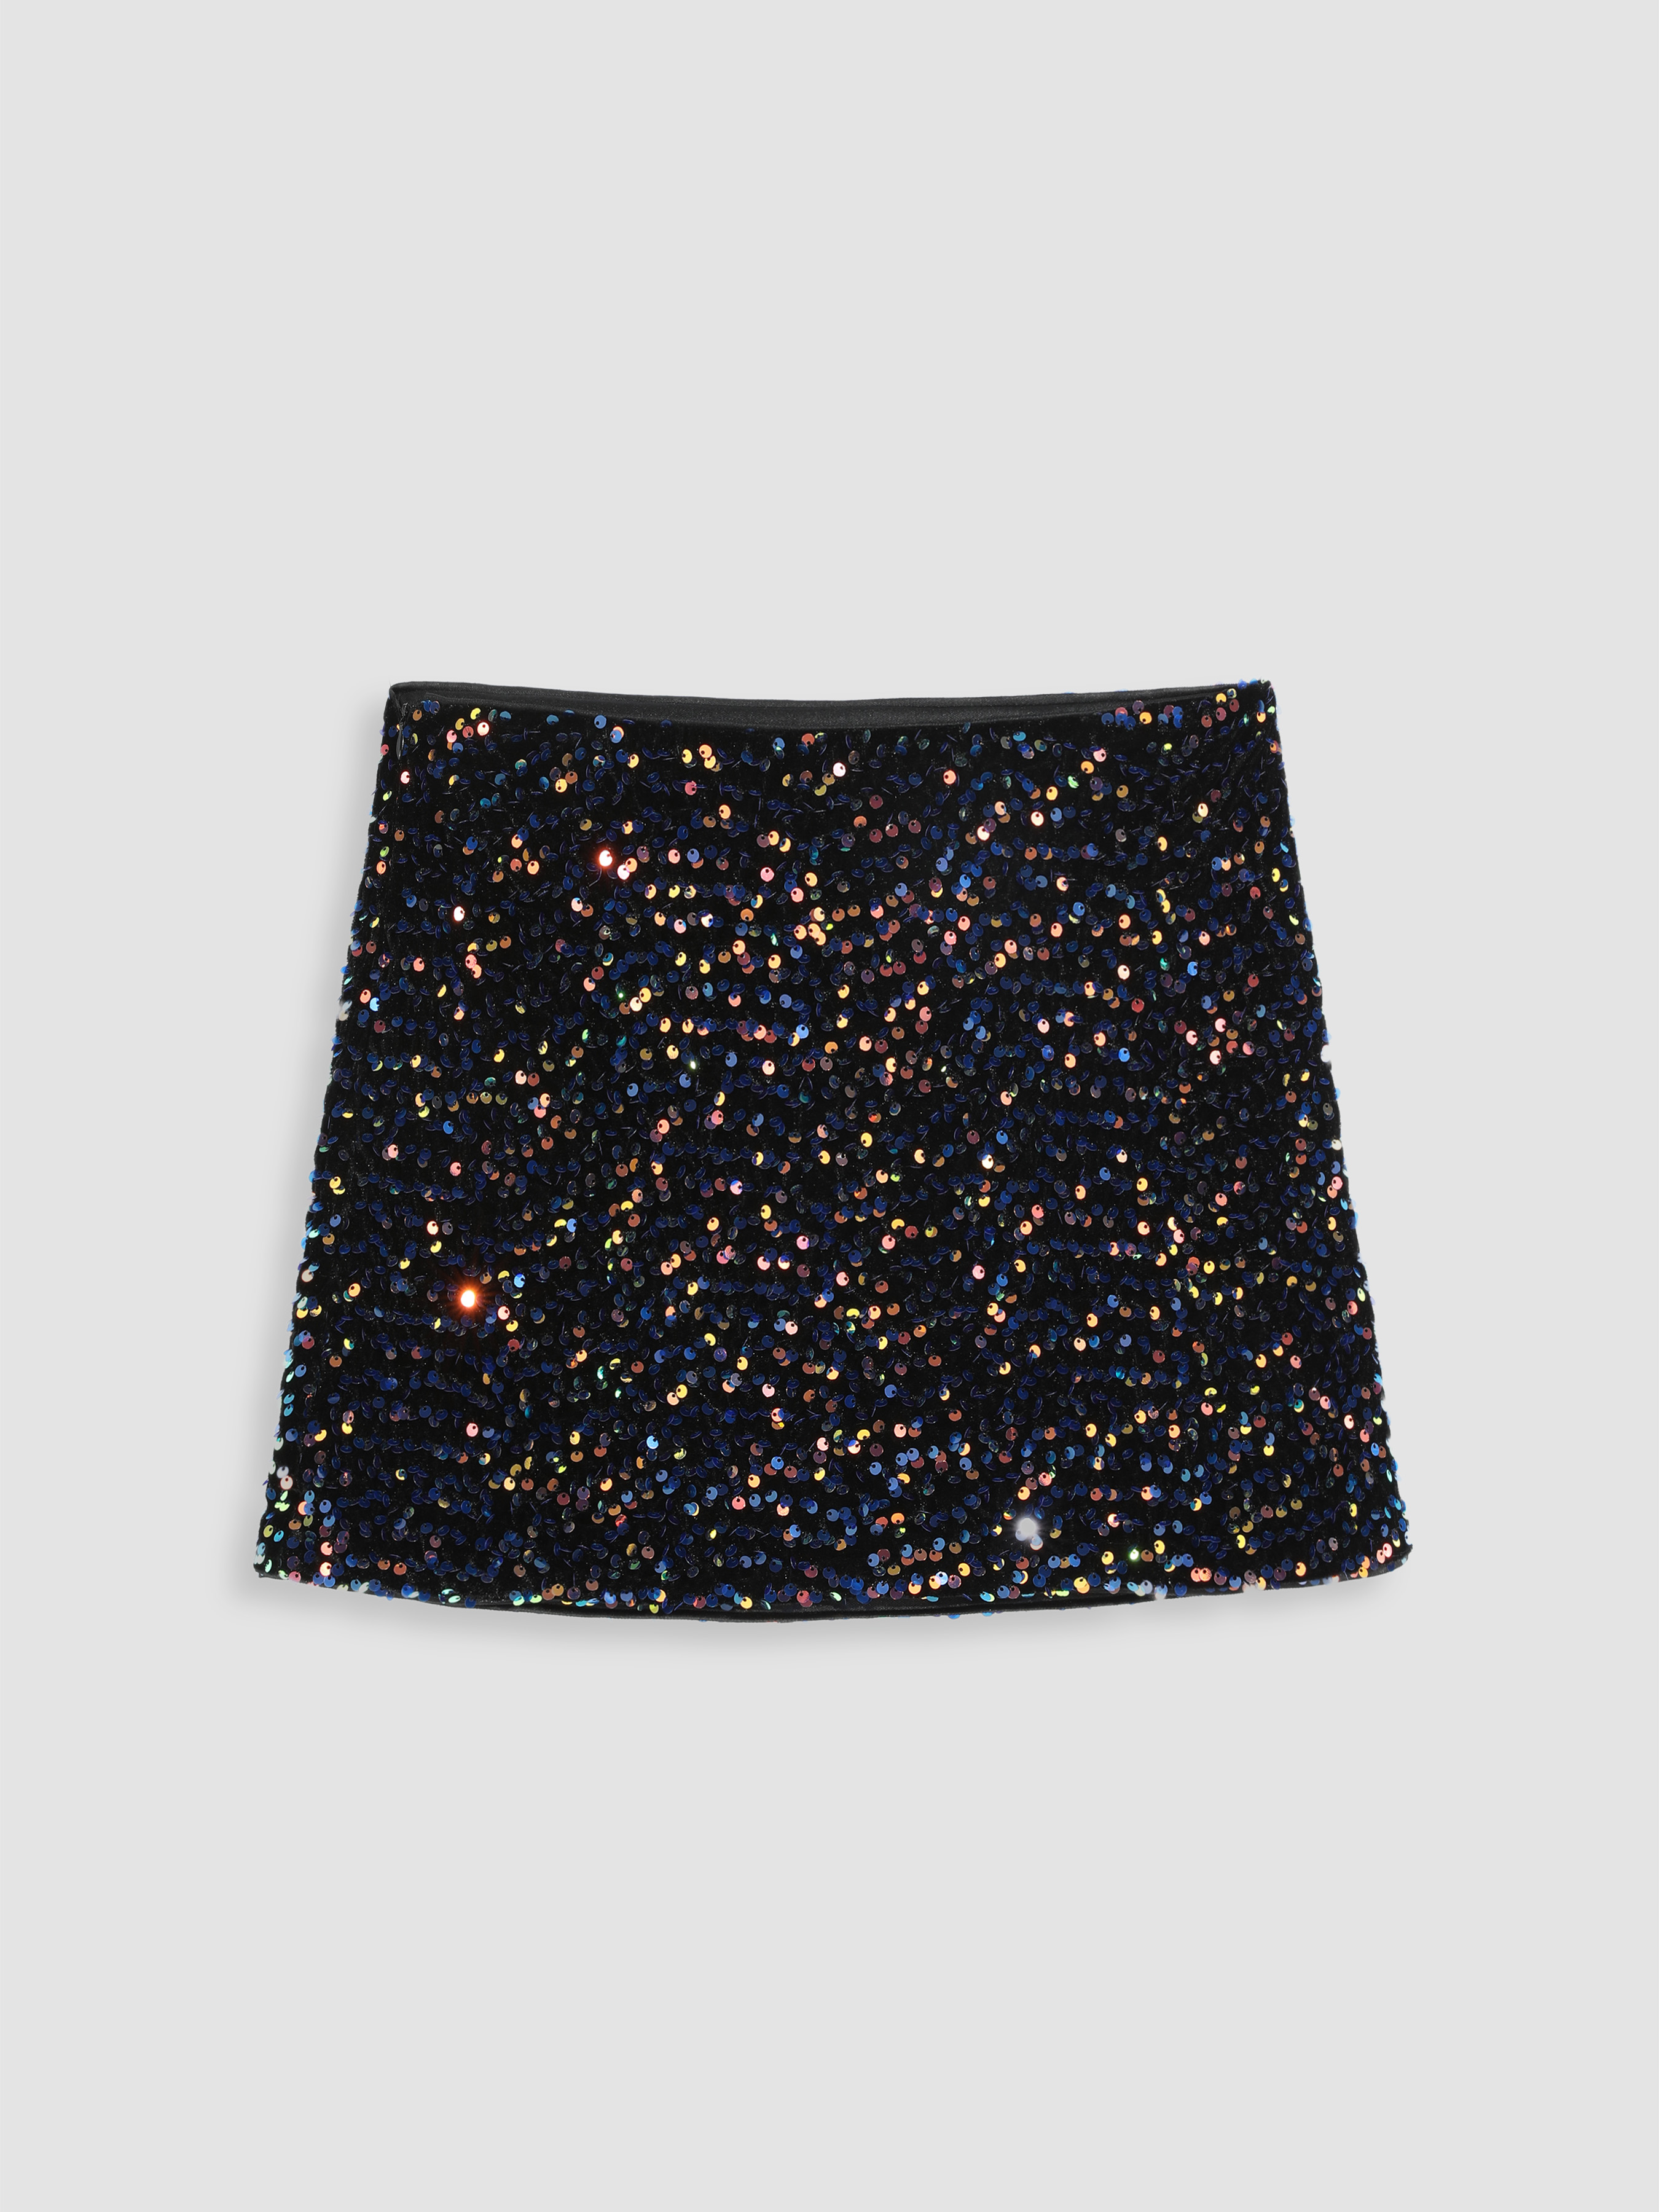 Hoco Dress Homecoming Sequin High Waist Mini Skirt For Party/Clubbing